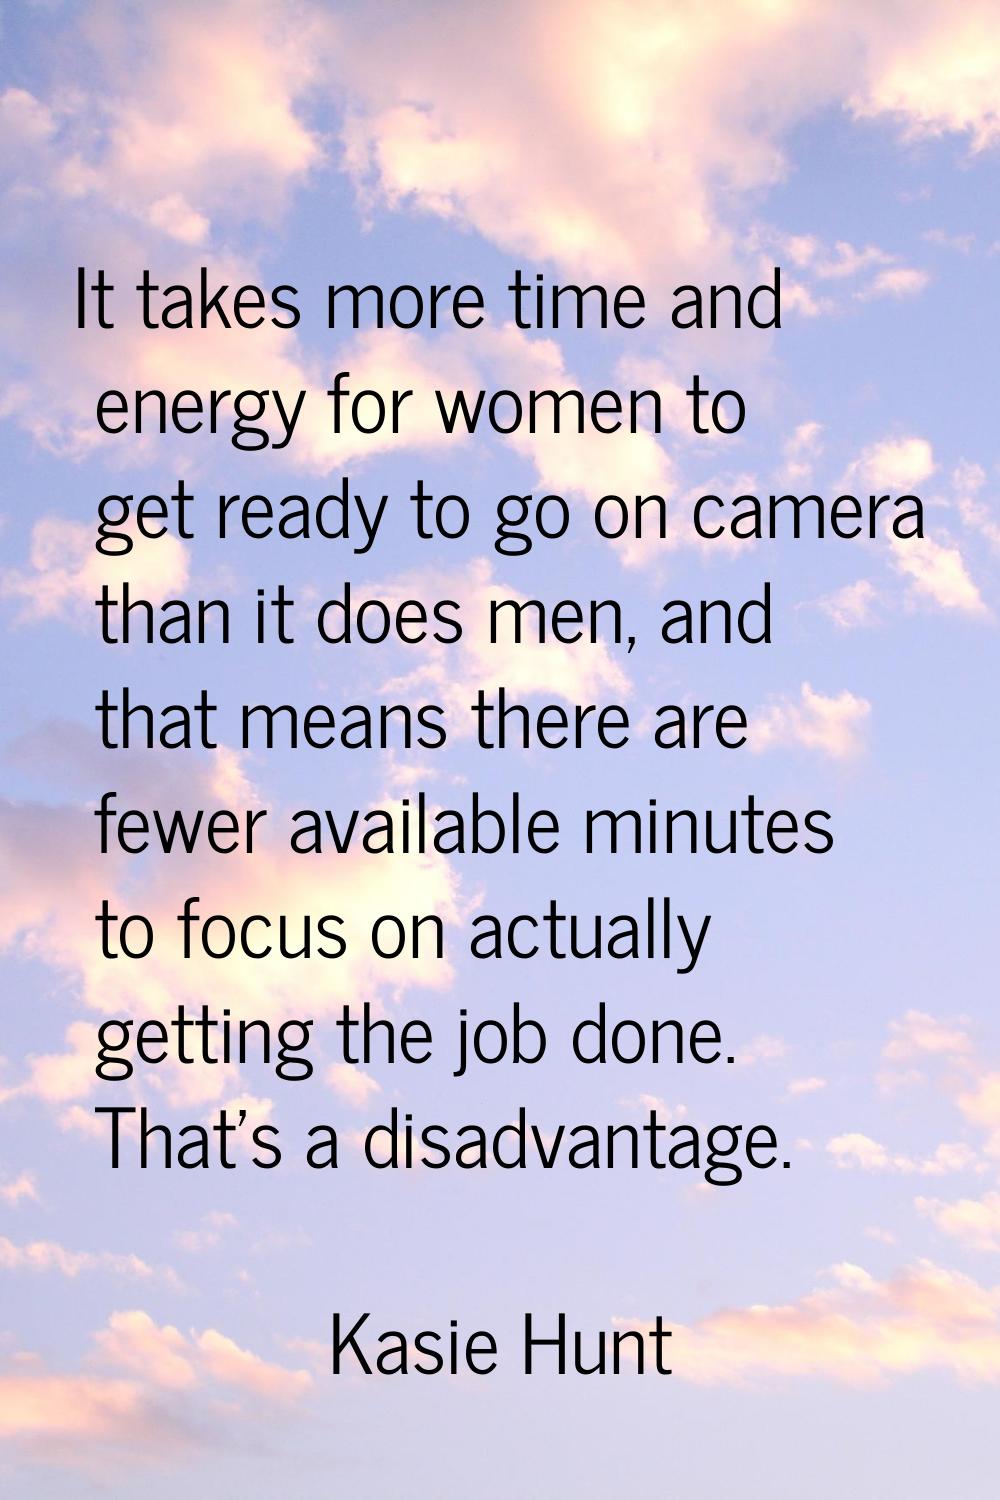 It takes more time and energy for women to get ready to go on camera than it does men, and that mea